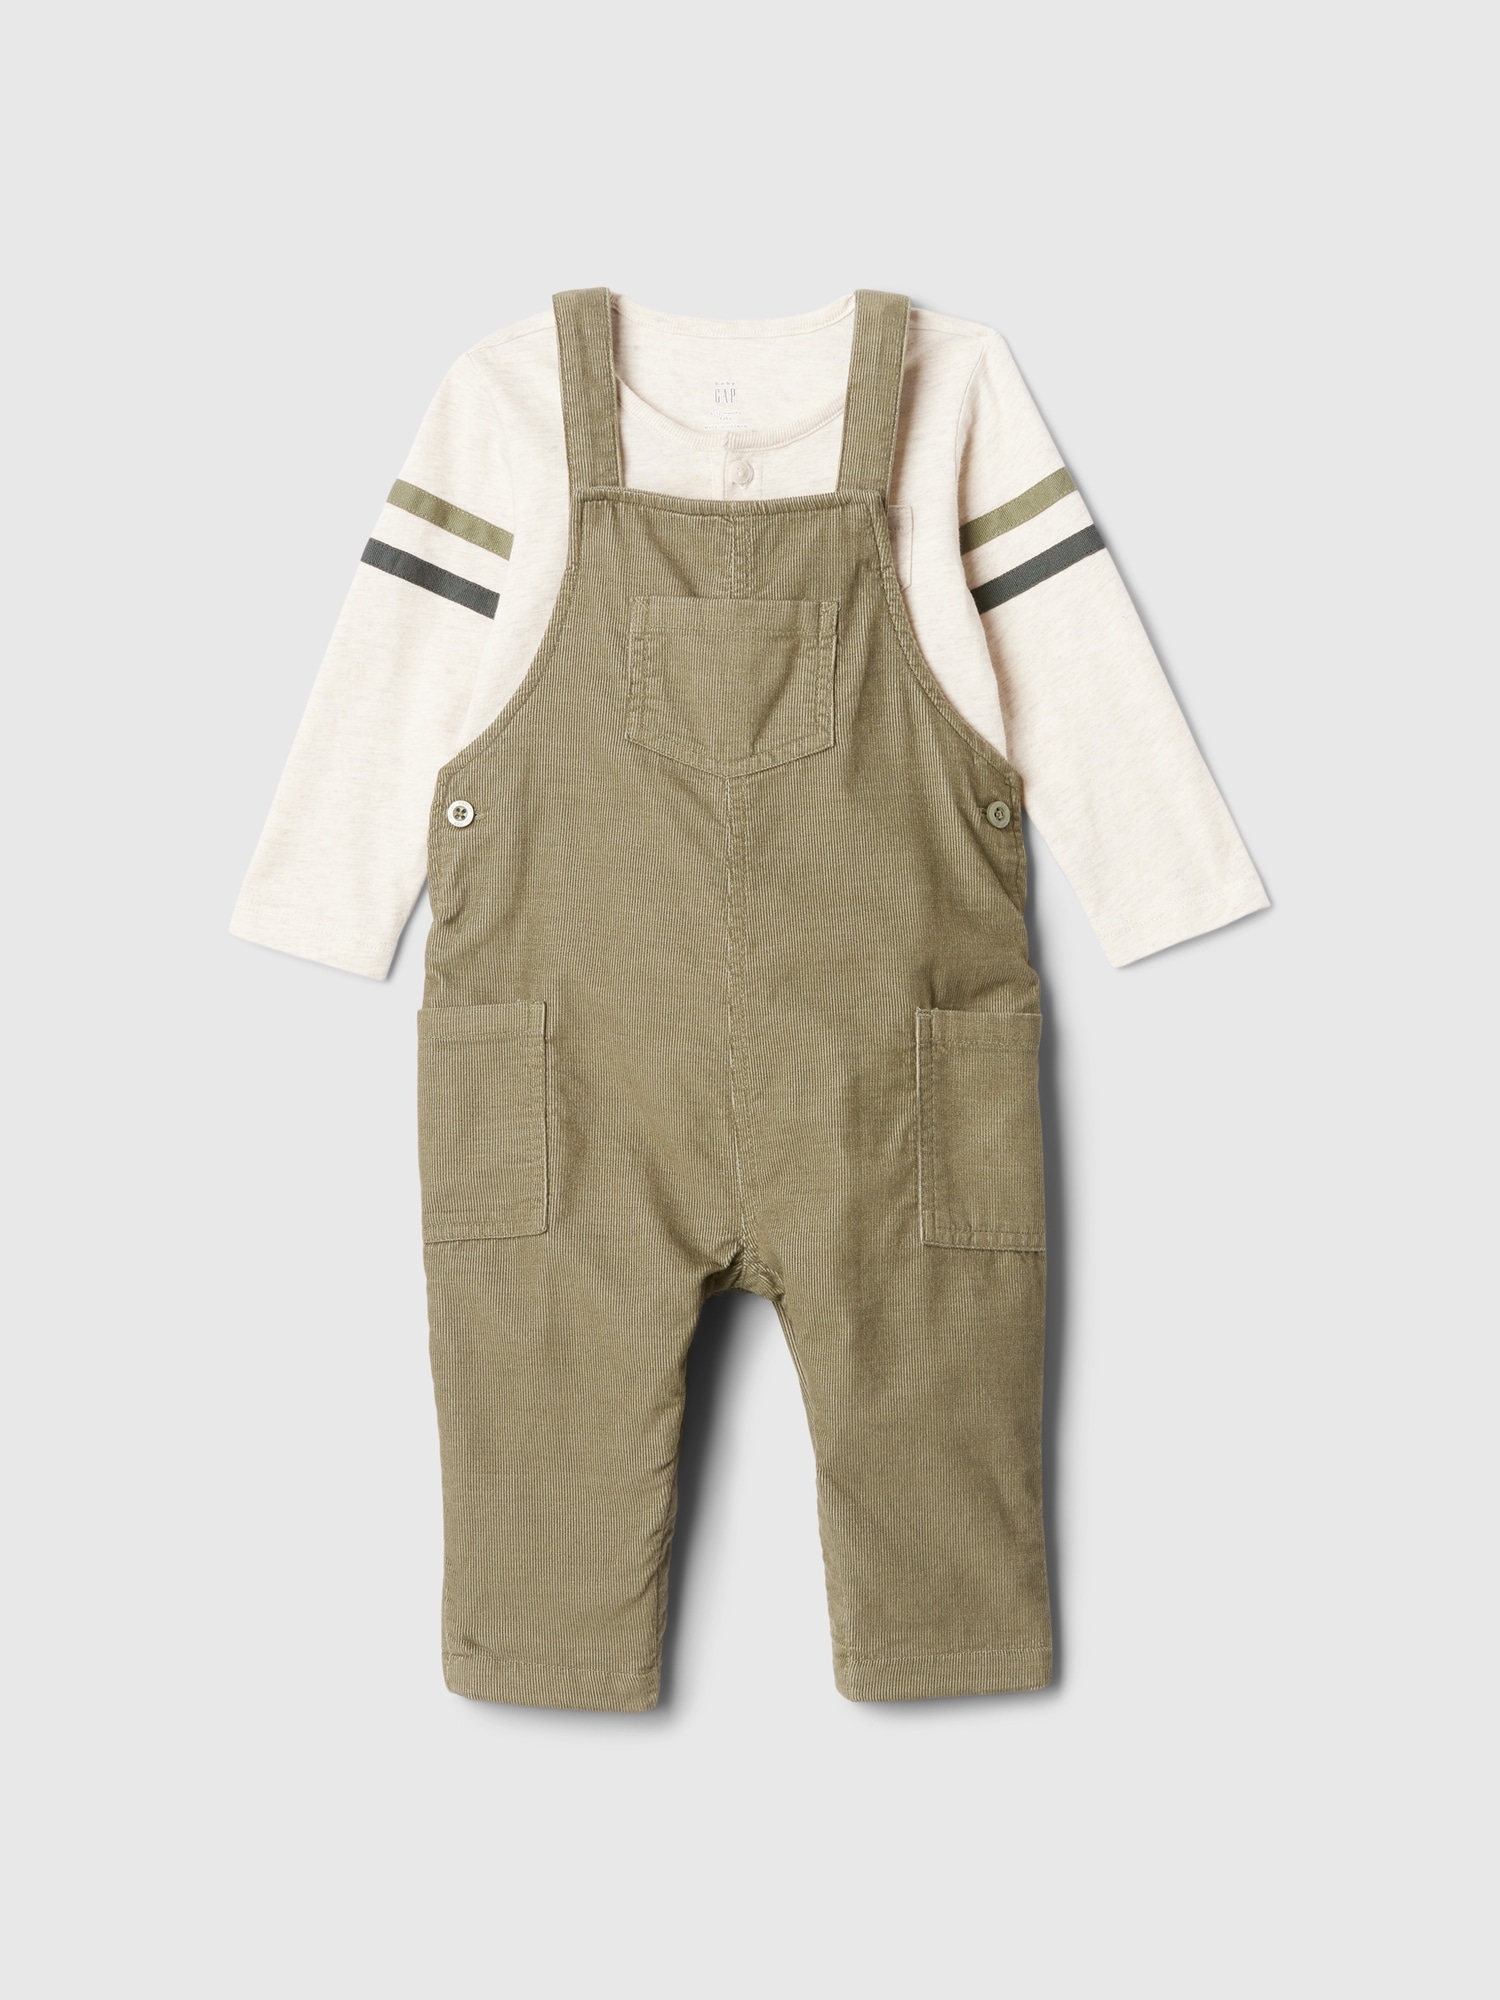 Baby Corduroy Overall Outfit Set